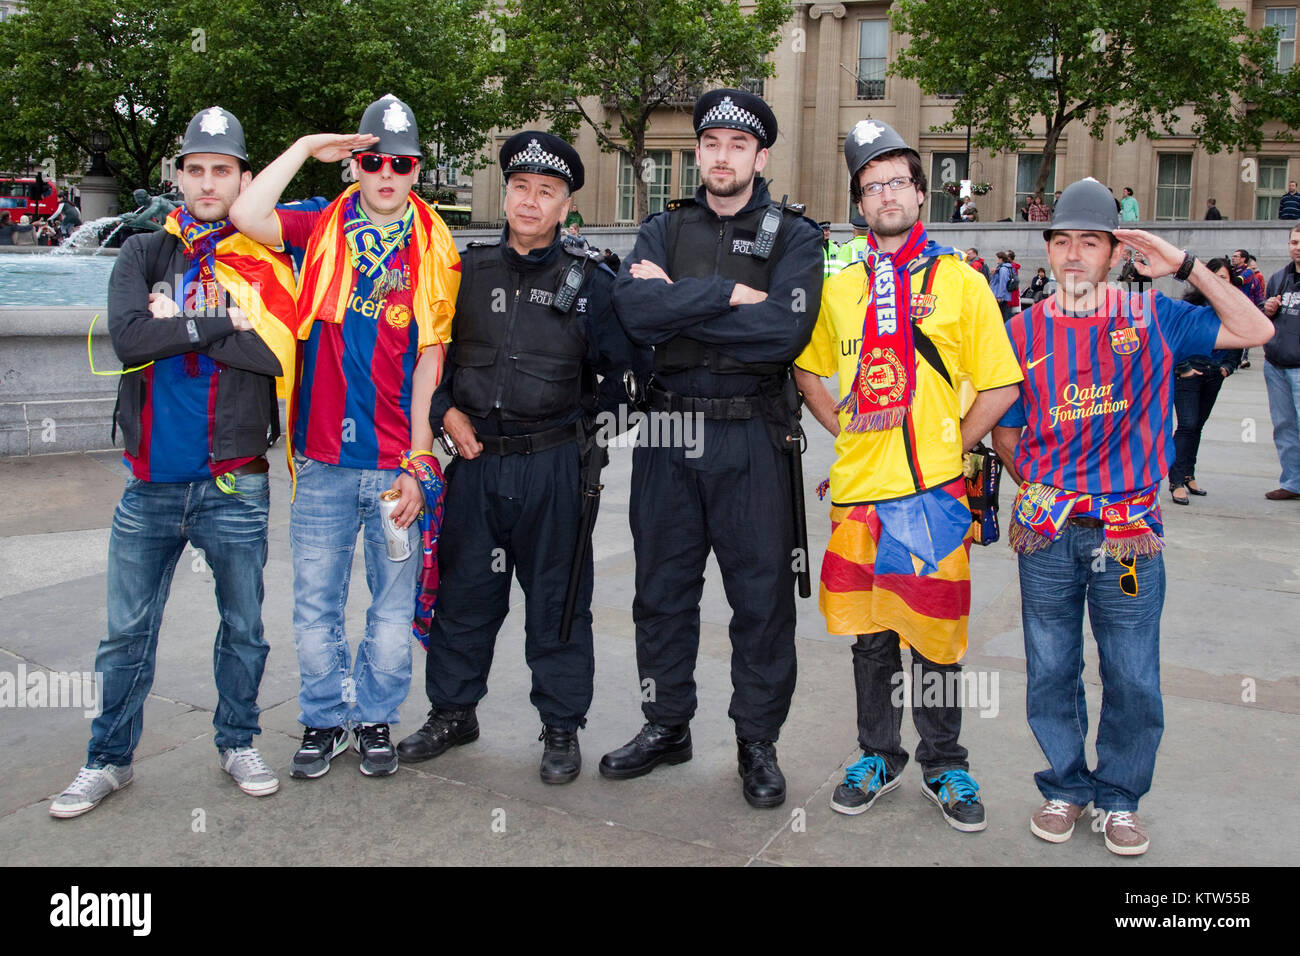 Friendly Barca fans in Trafalgar Square posing with police officers before the kick-off of the Champions League Final between FC Barcelona and Manchester United. Stock Photo